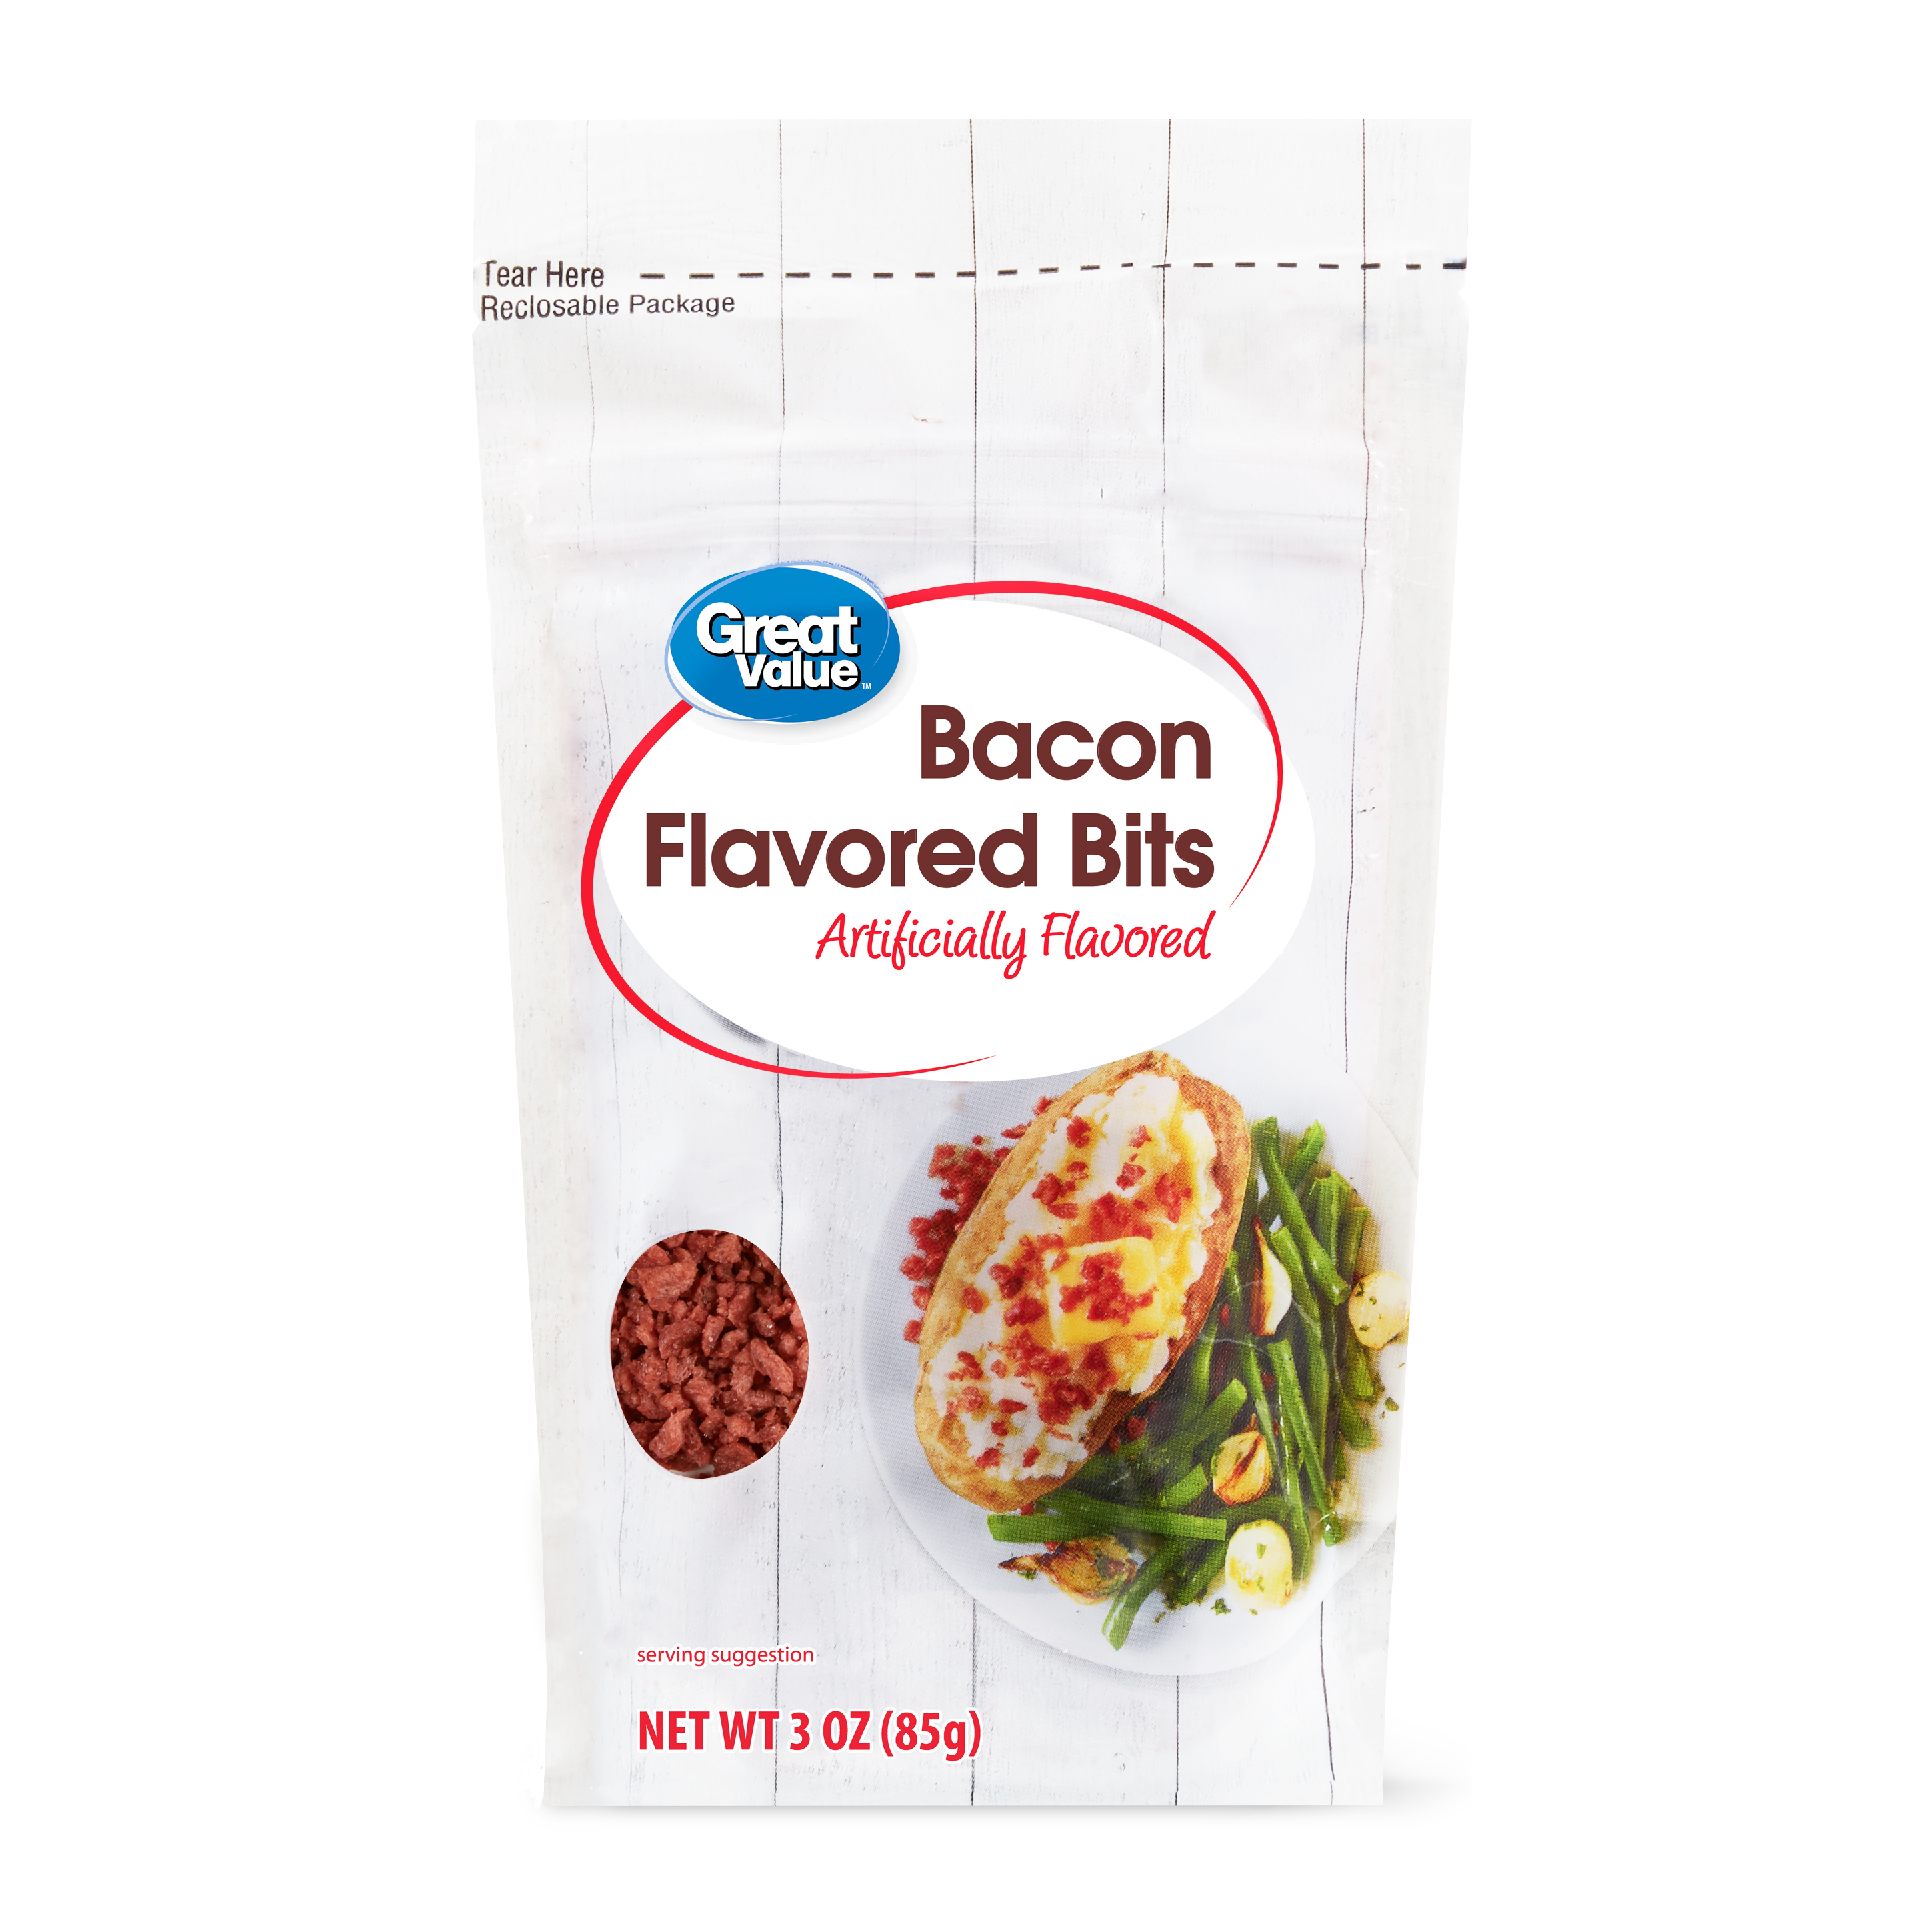 Great Value Bacon Flavored Bits, 3 Oz Image